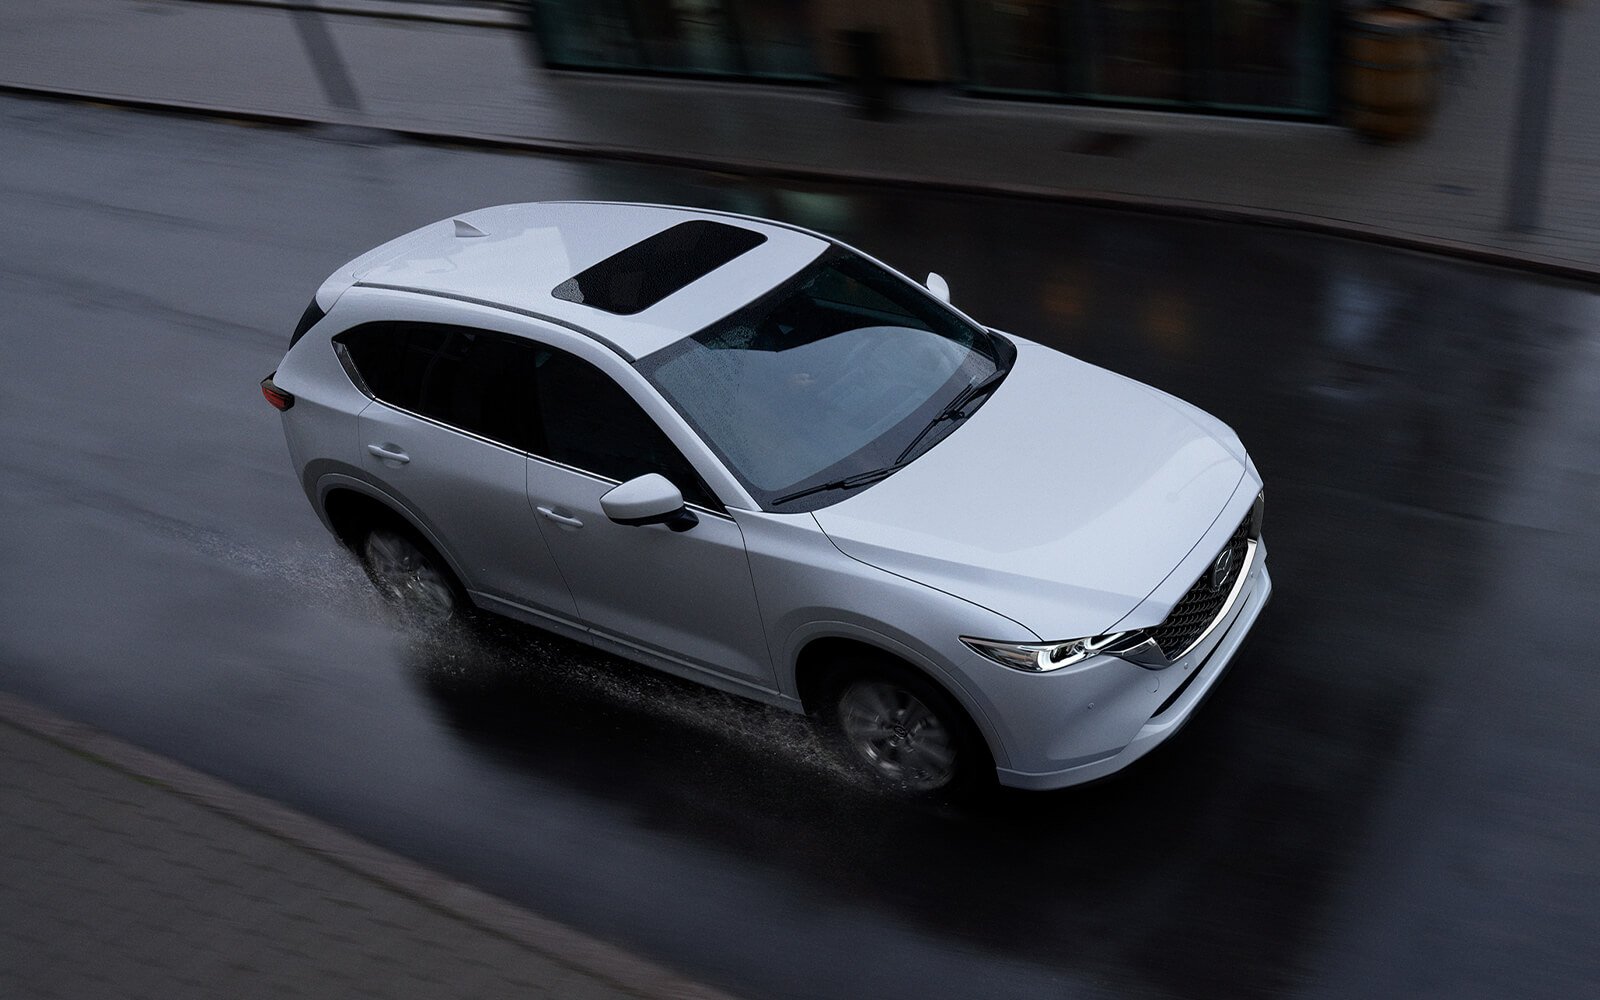 White Mazda CX-5 with closed sunroof driving down urban street in the rain